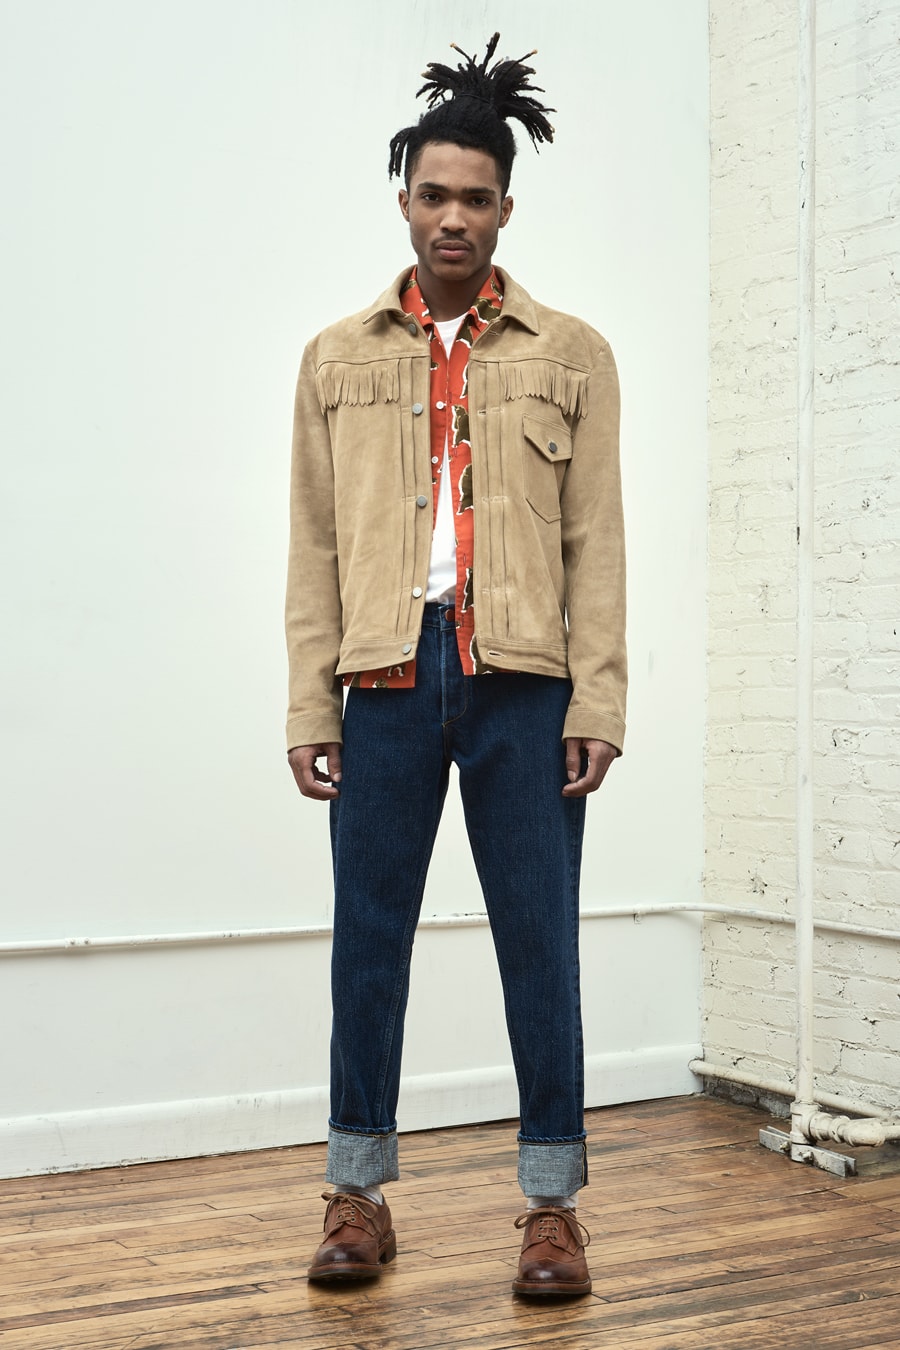 Band of Outsiders 2017 Fall/Winter Lookbook